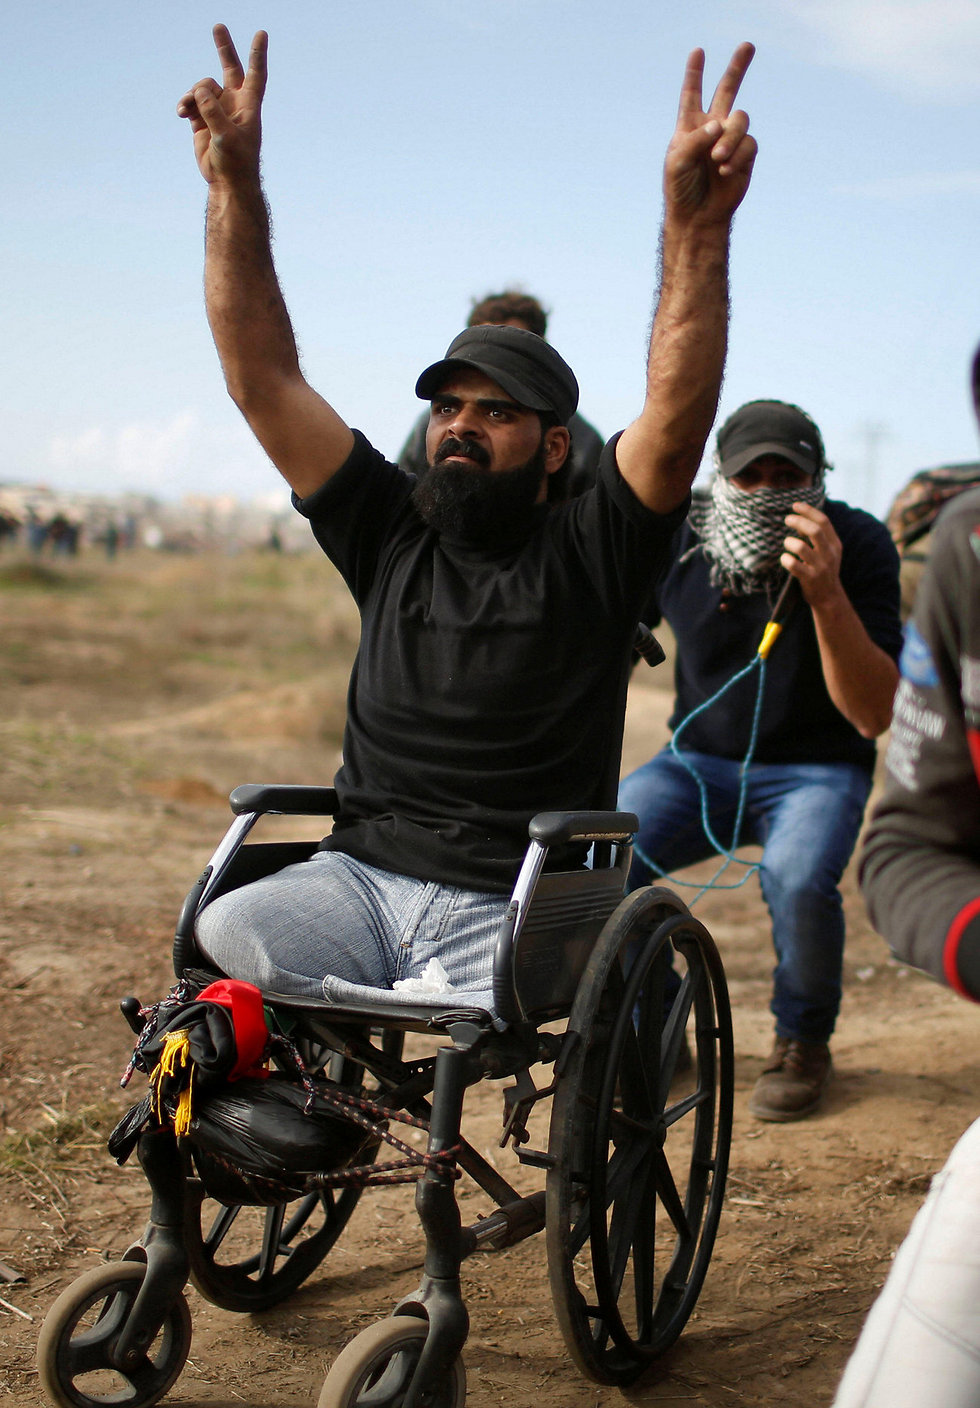 Abu Thuraya during the December 15 riots in Gaza (Photo: Reuters)